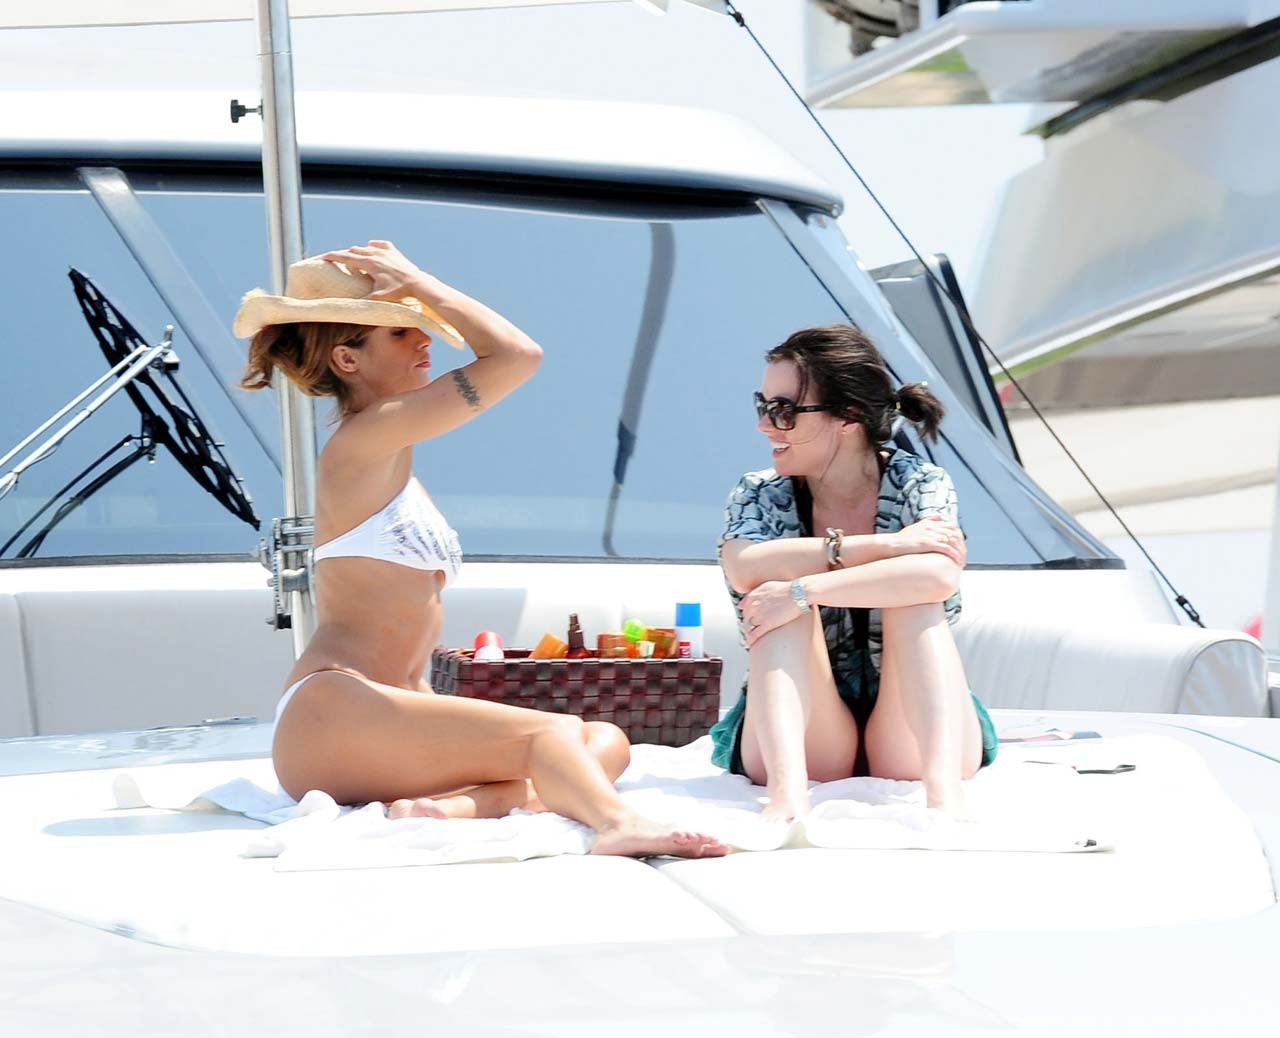 Elisabetta Canalis exposing her great ass and sexy body in bikini on yacht papar #75303505